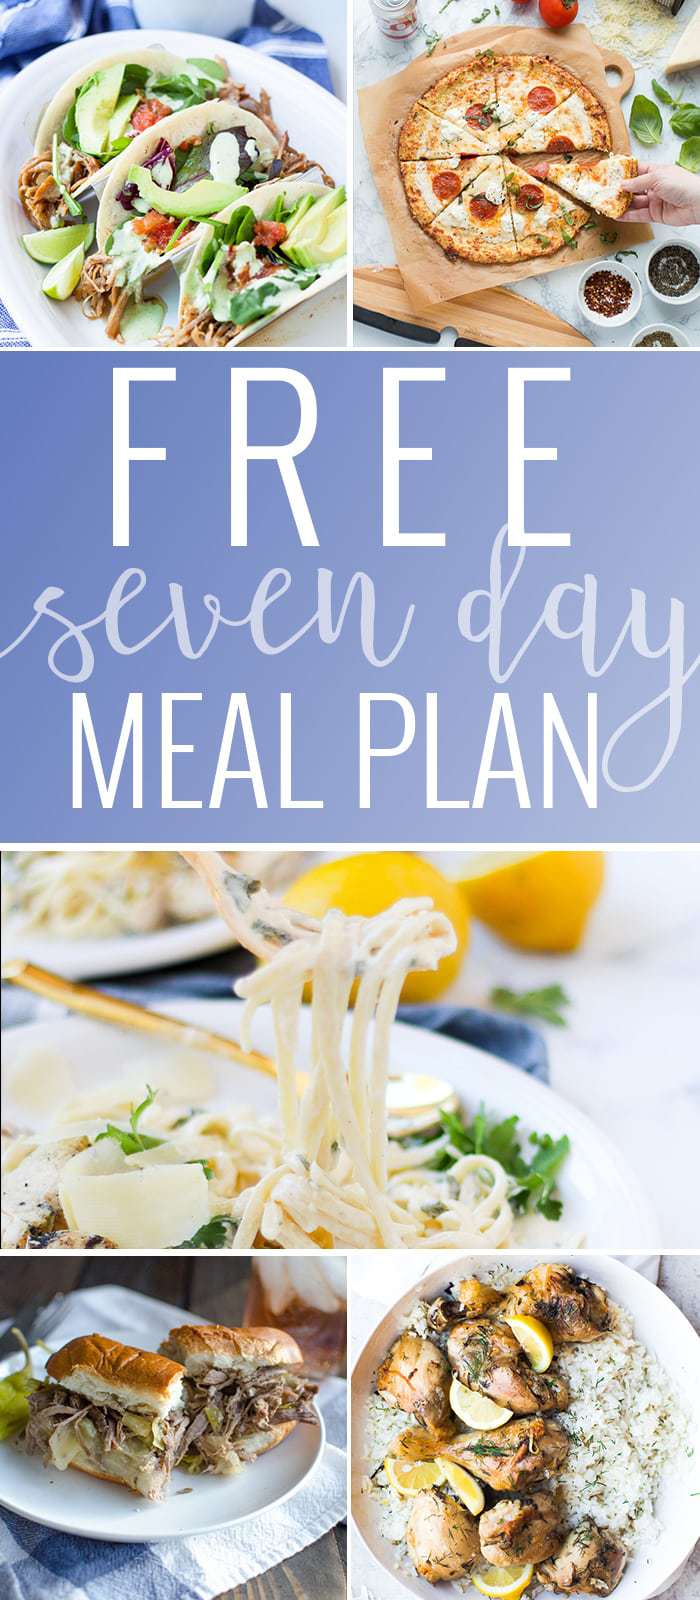 Free 7 Day Meal Plan | meal planning made easy | easy meal plan | free meal plan | simple meal planning tips | how to meal plan | meal plan printable || Oh So Delicioso #mealplan #freemealplann #mealplanning